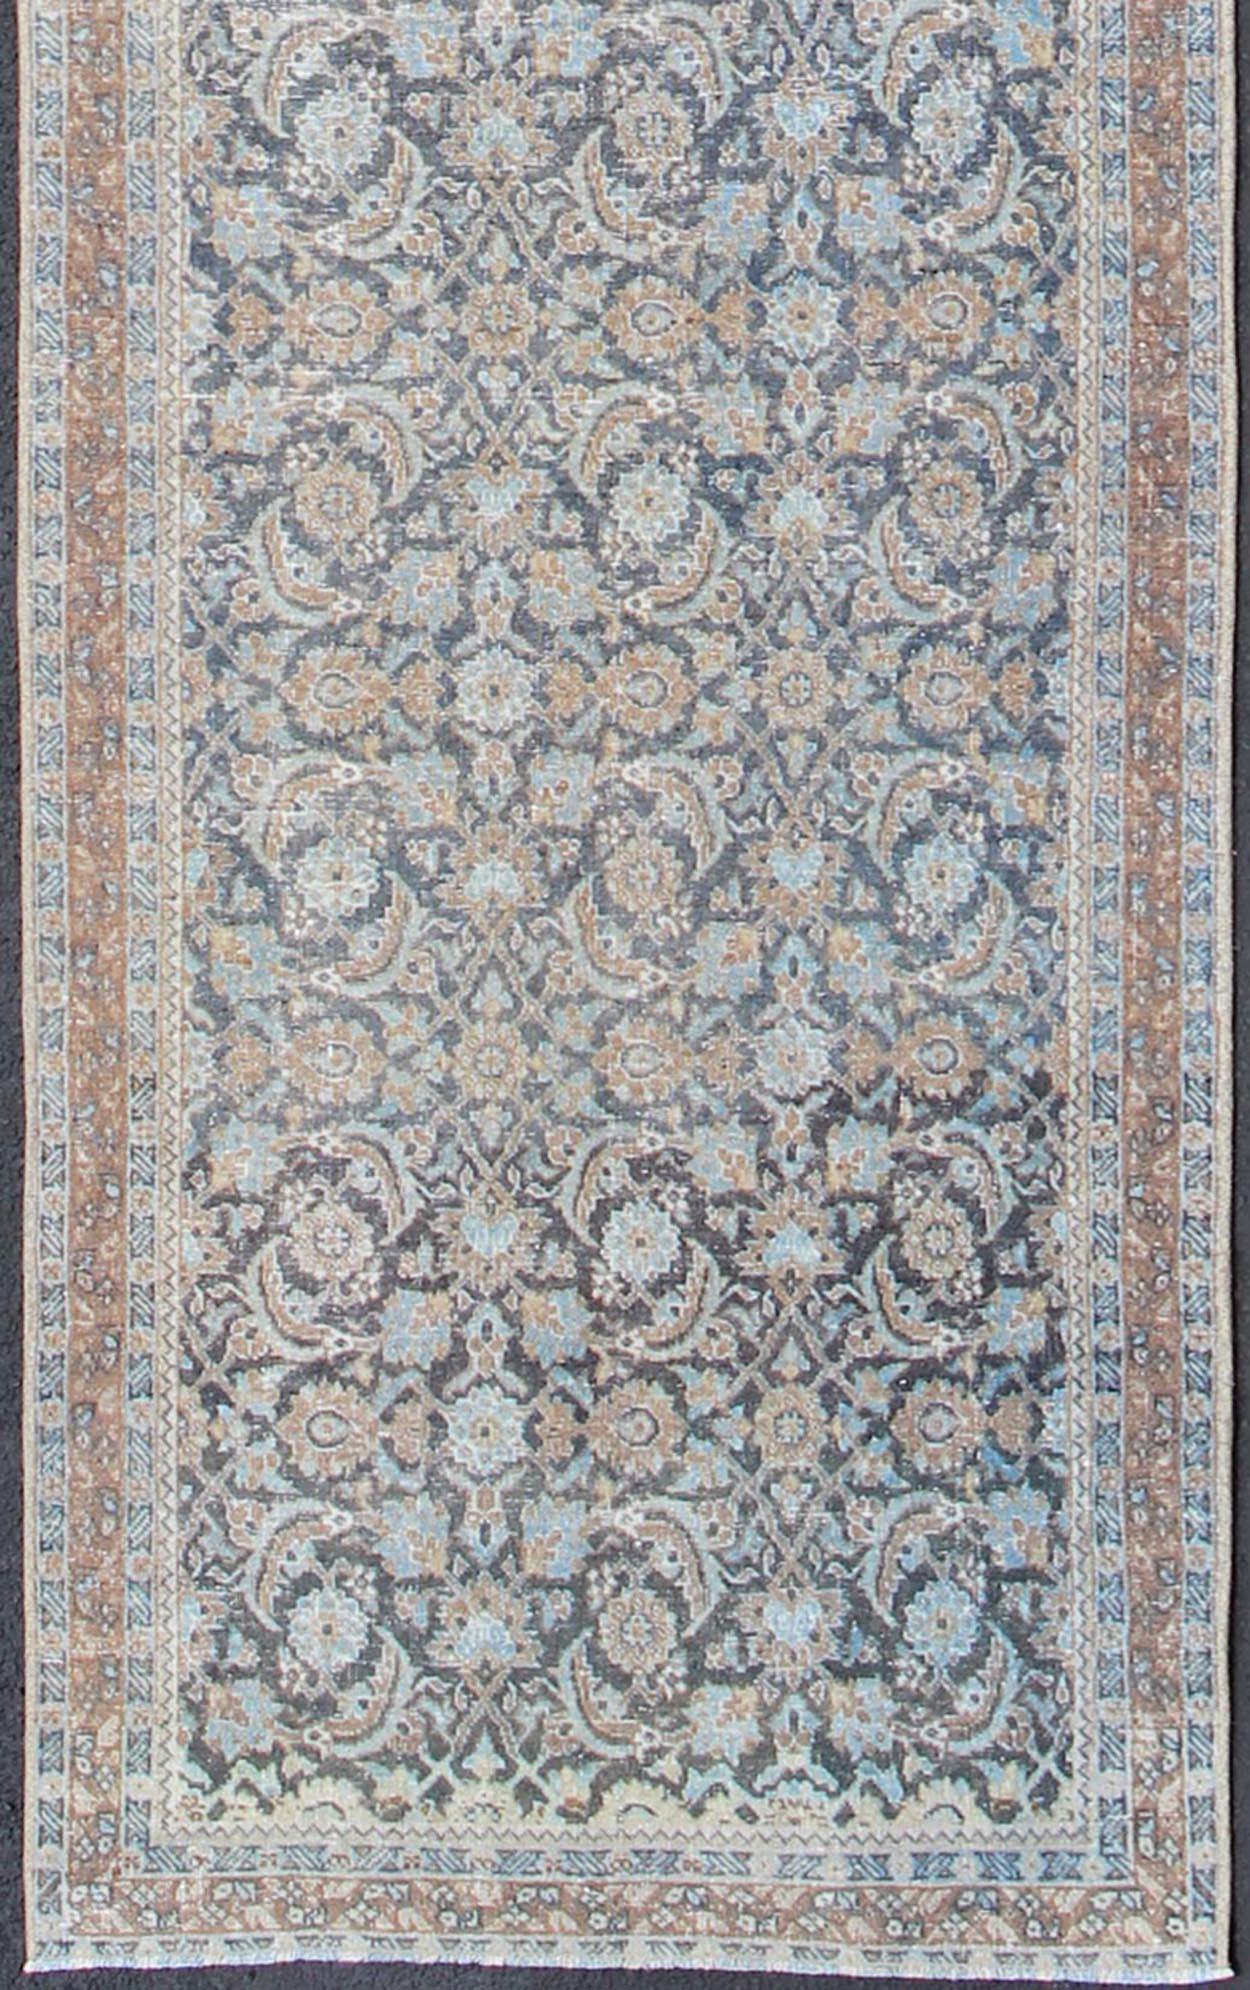 Shades of blue and taupe elegant and ornate Persian Tabriz vintage runner, rug sus-1807-258, country of origin / type: Iran / Tabriz, circa 1930.

This vintage Persian runner with a sophisticated, all-over design features a natural color